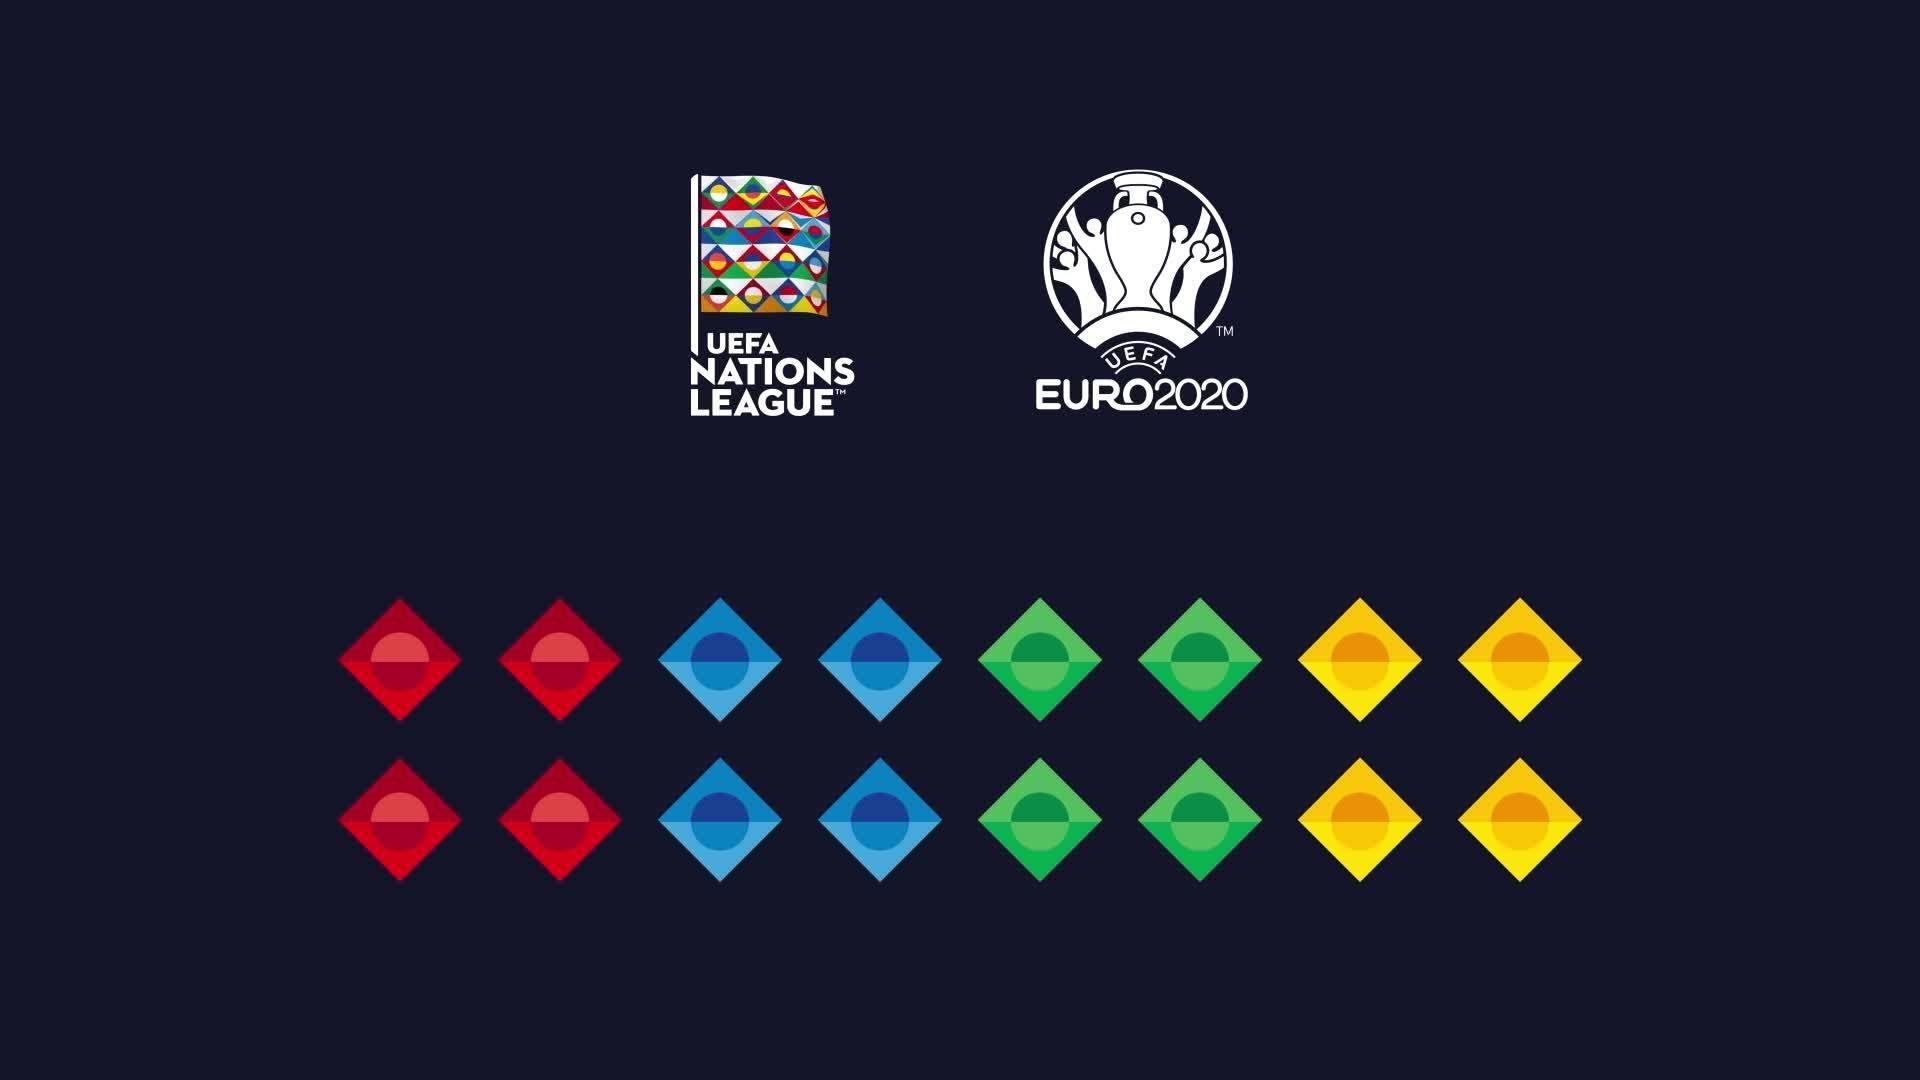 UEFA Nations League explained: How does it work? And everything else